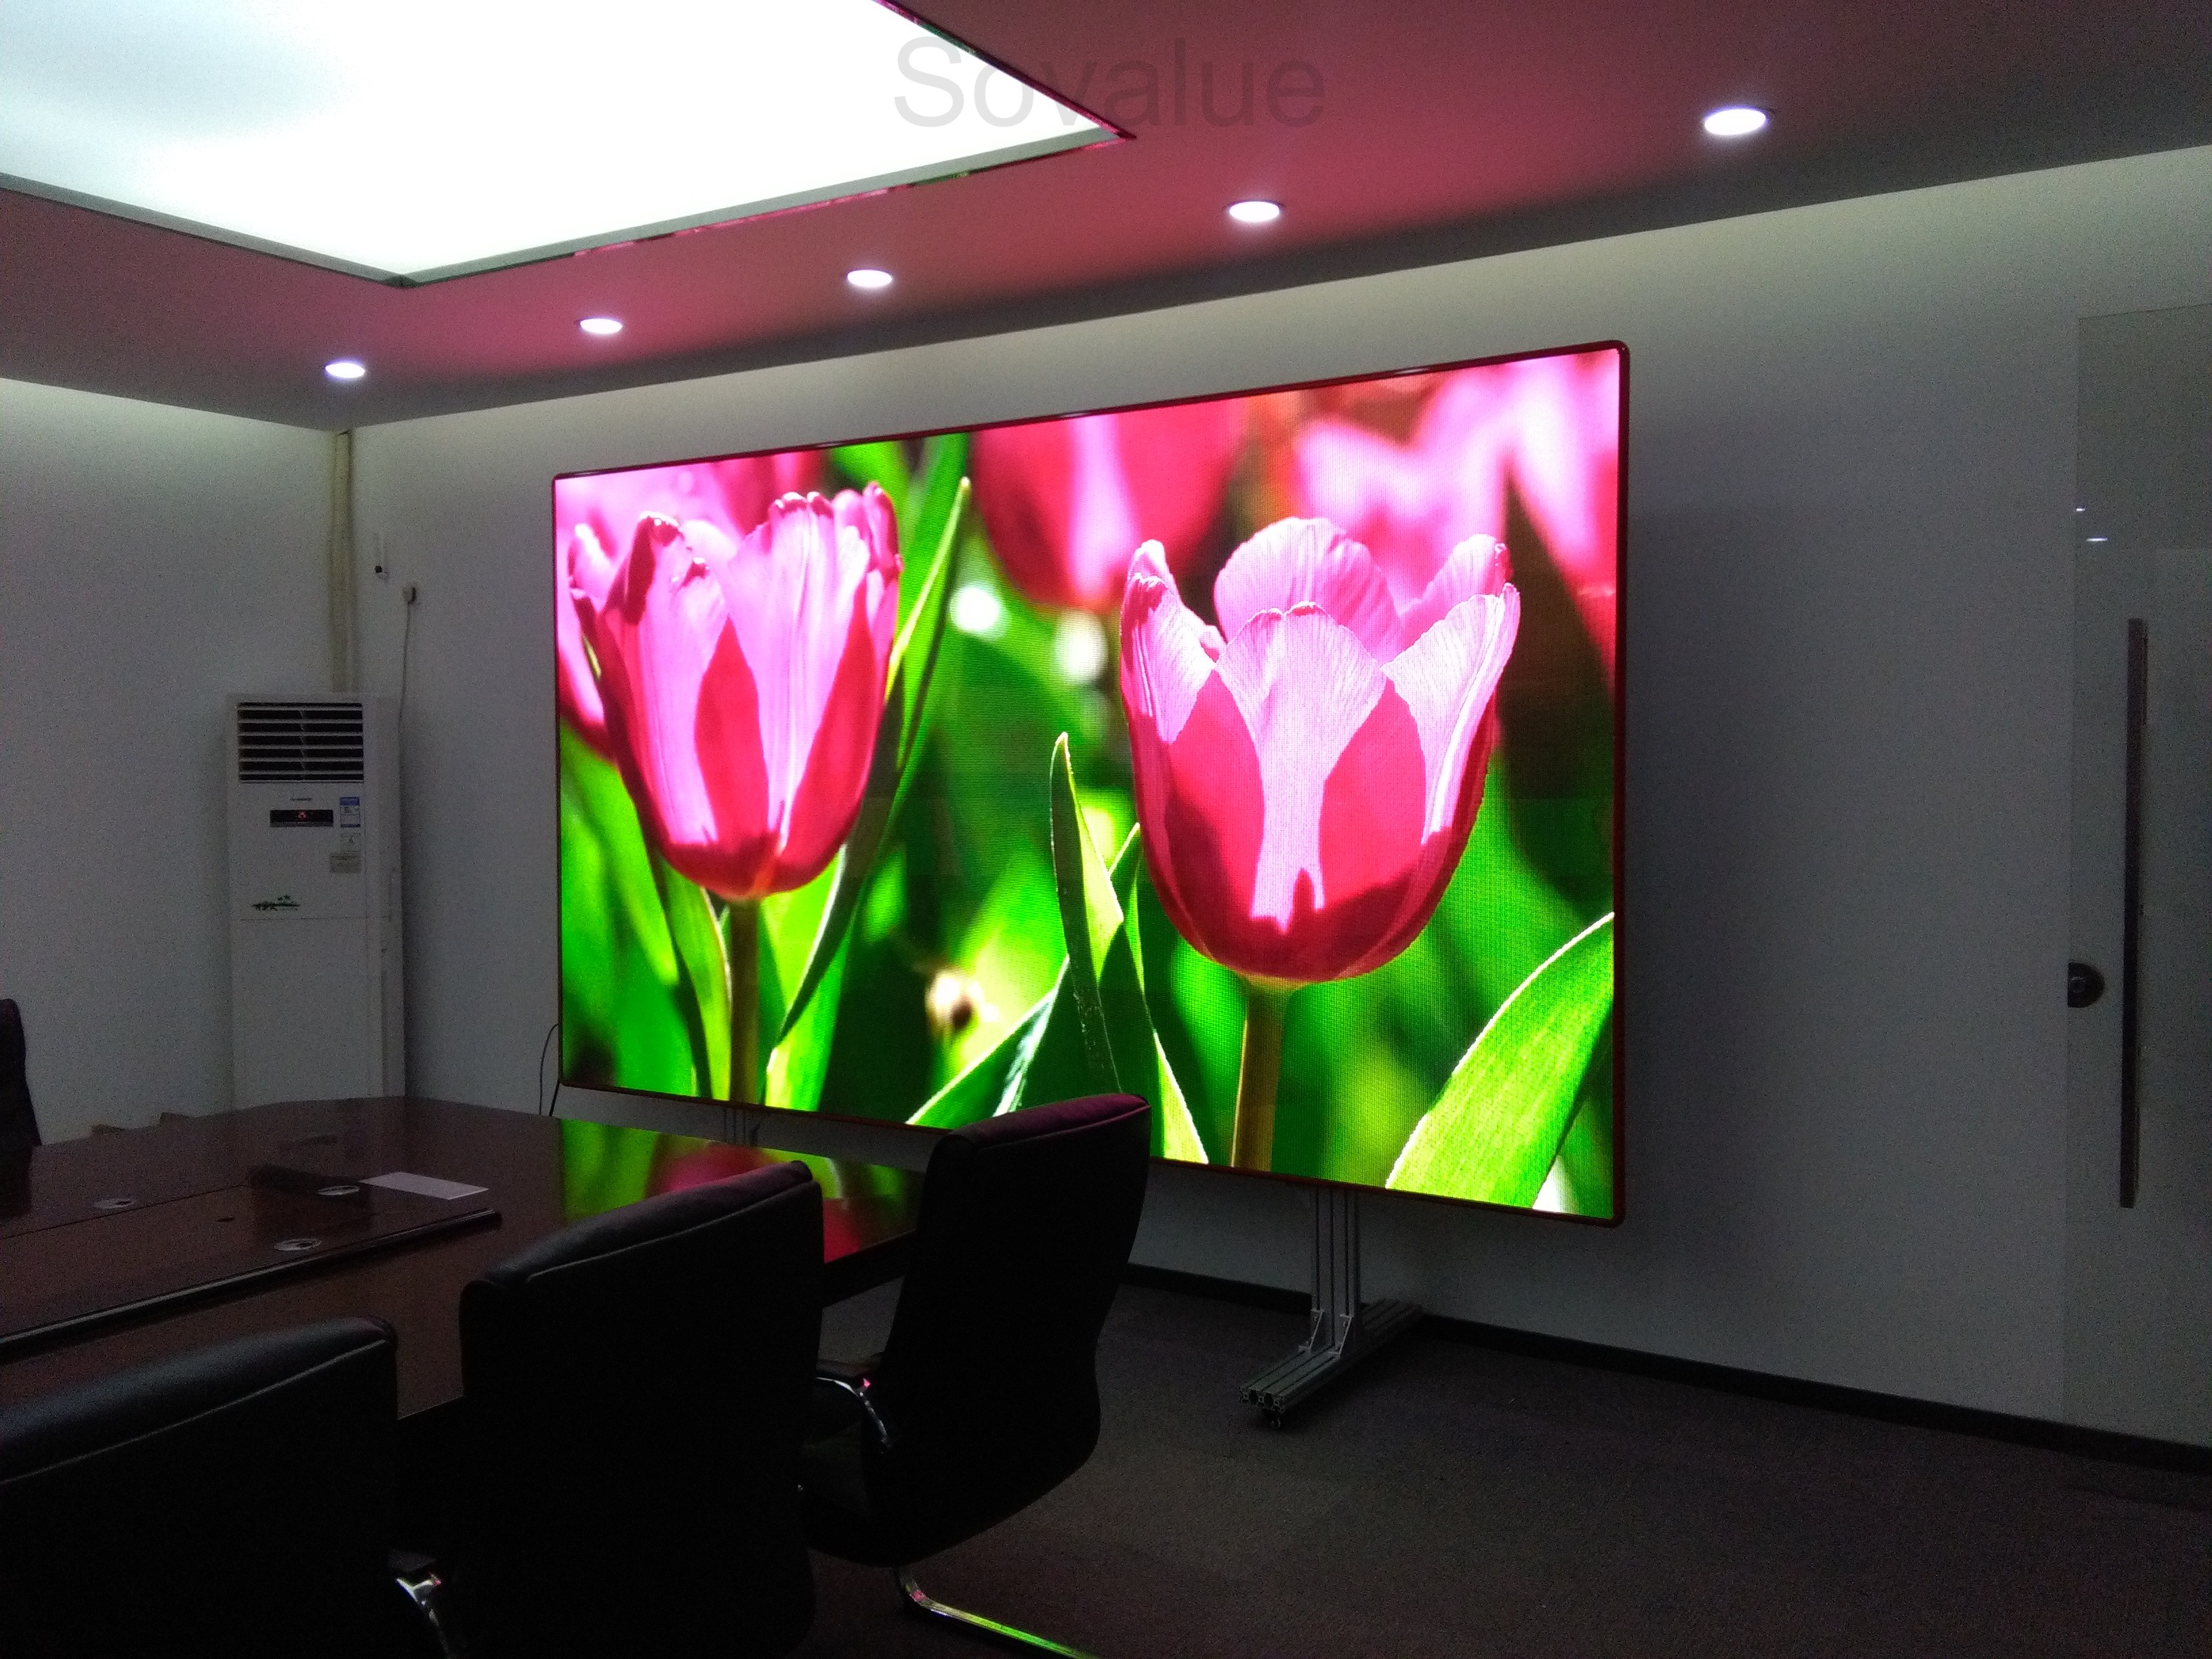 1 Commercial LED display